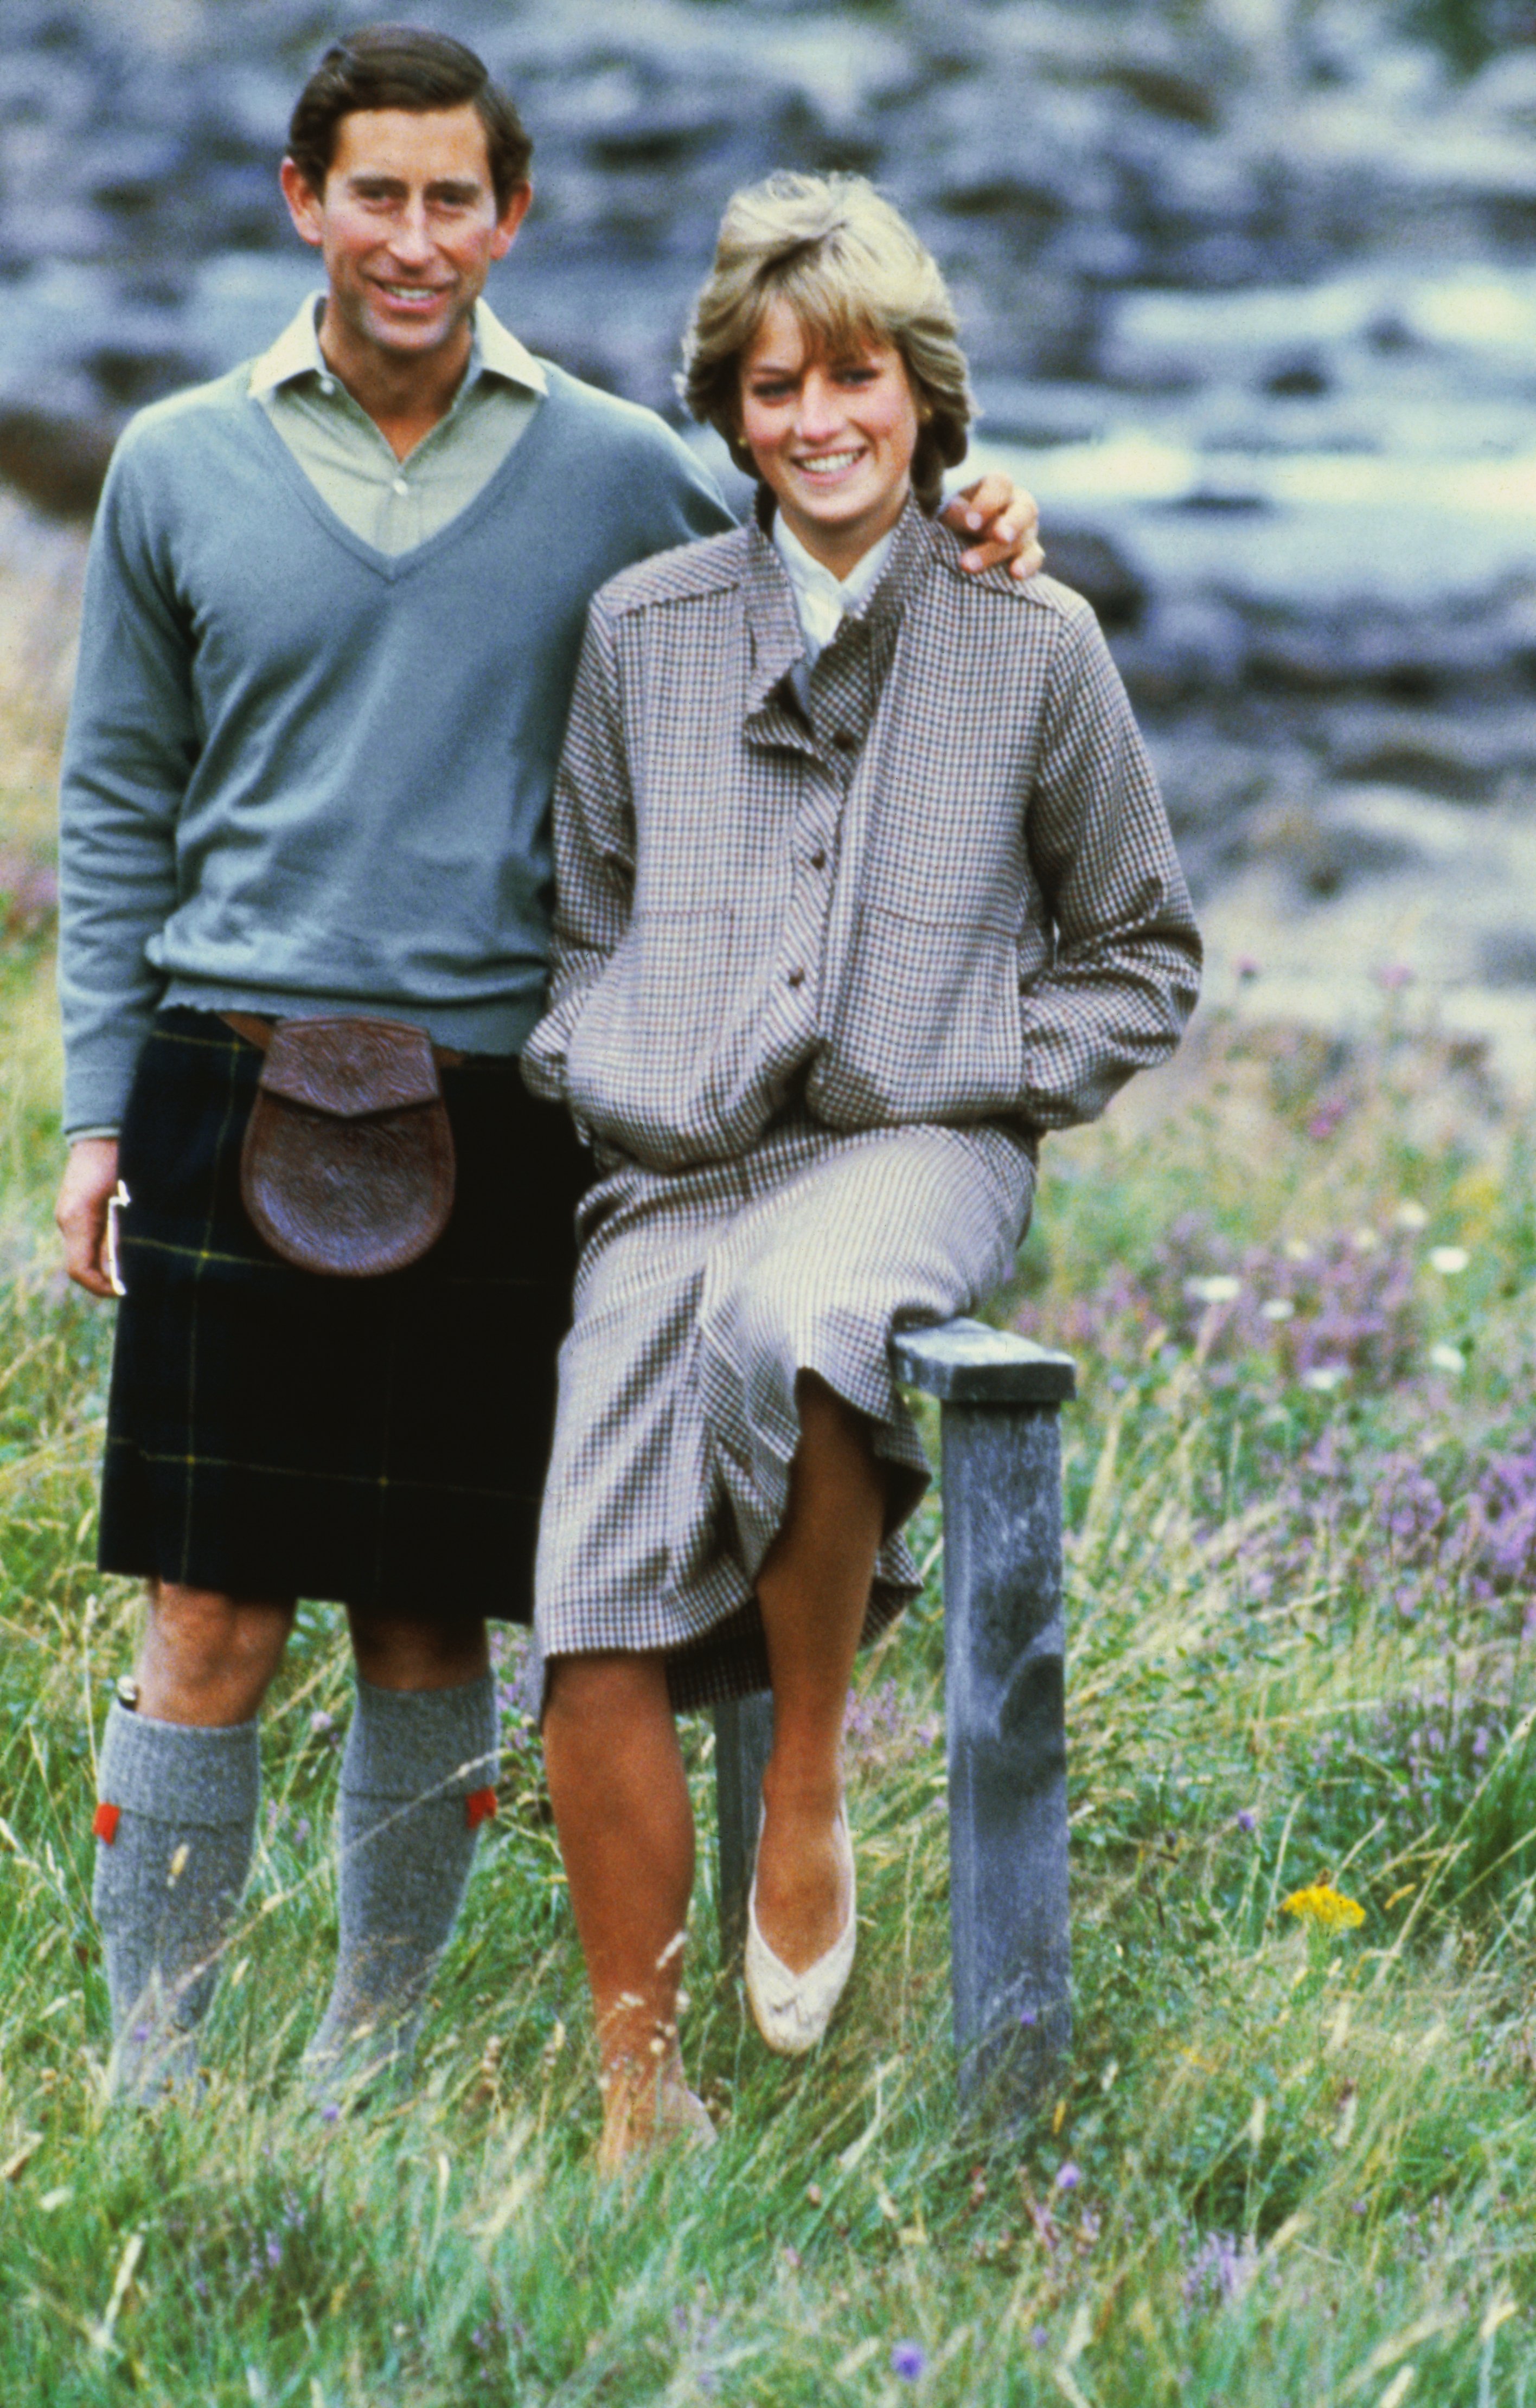 Prince Charles and Princess Diana posing together at Balmoral in 1981 in Balmoral, Scotland ┃Source: Getty Images